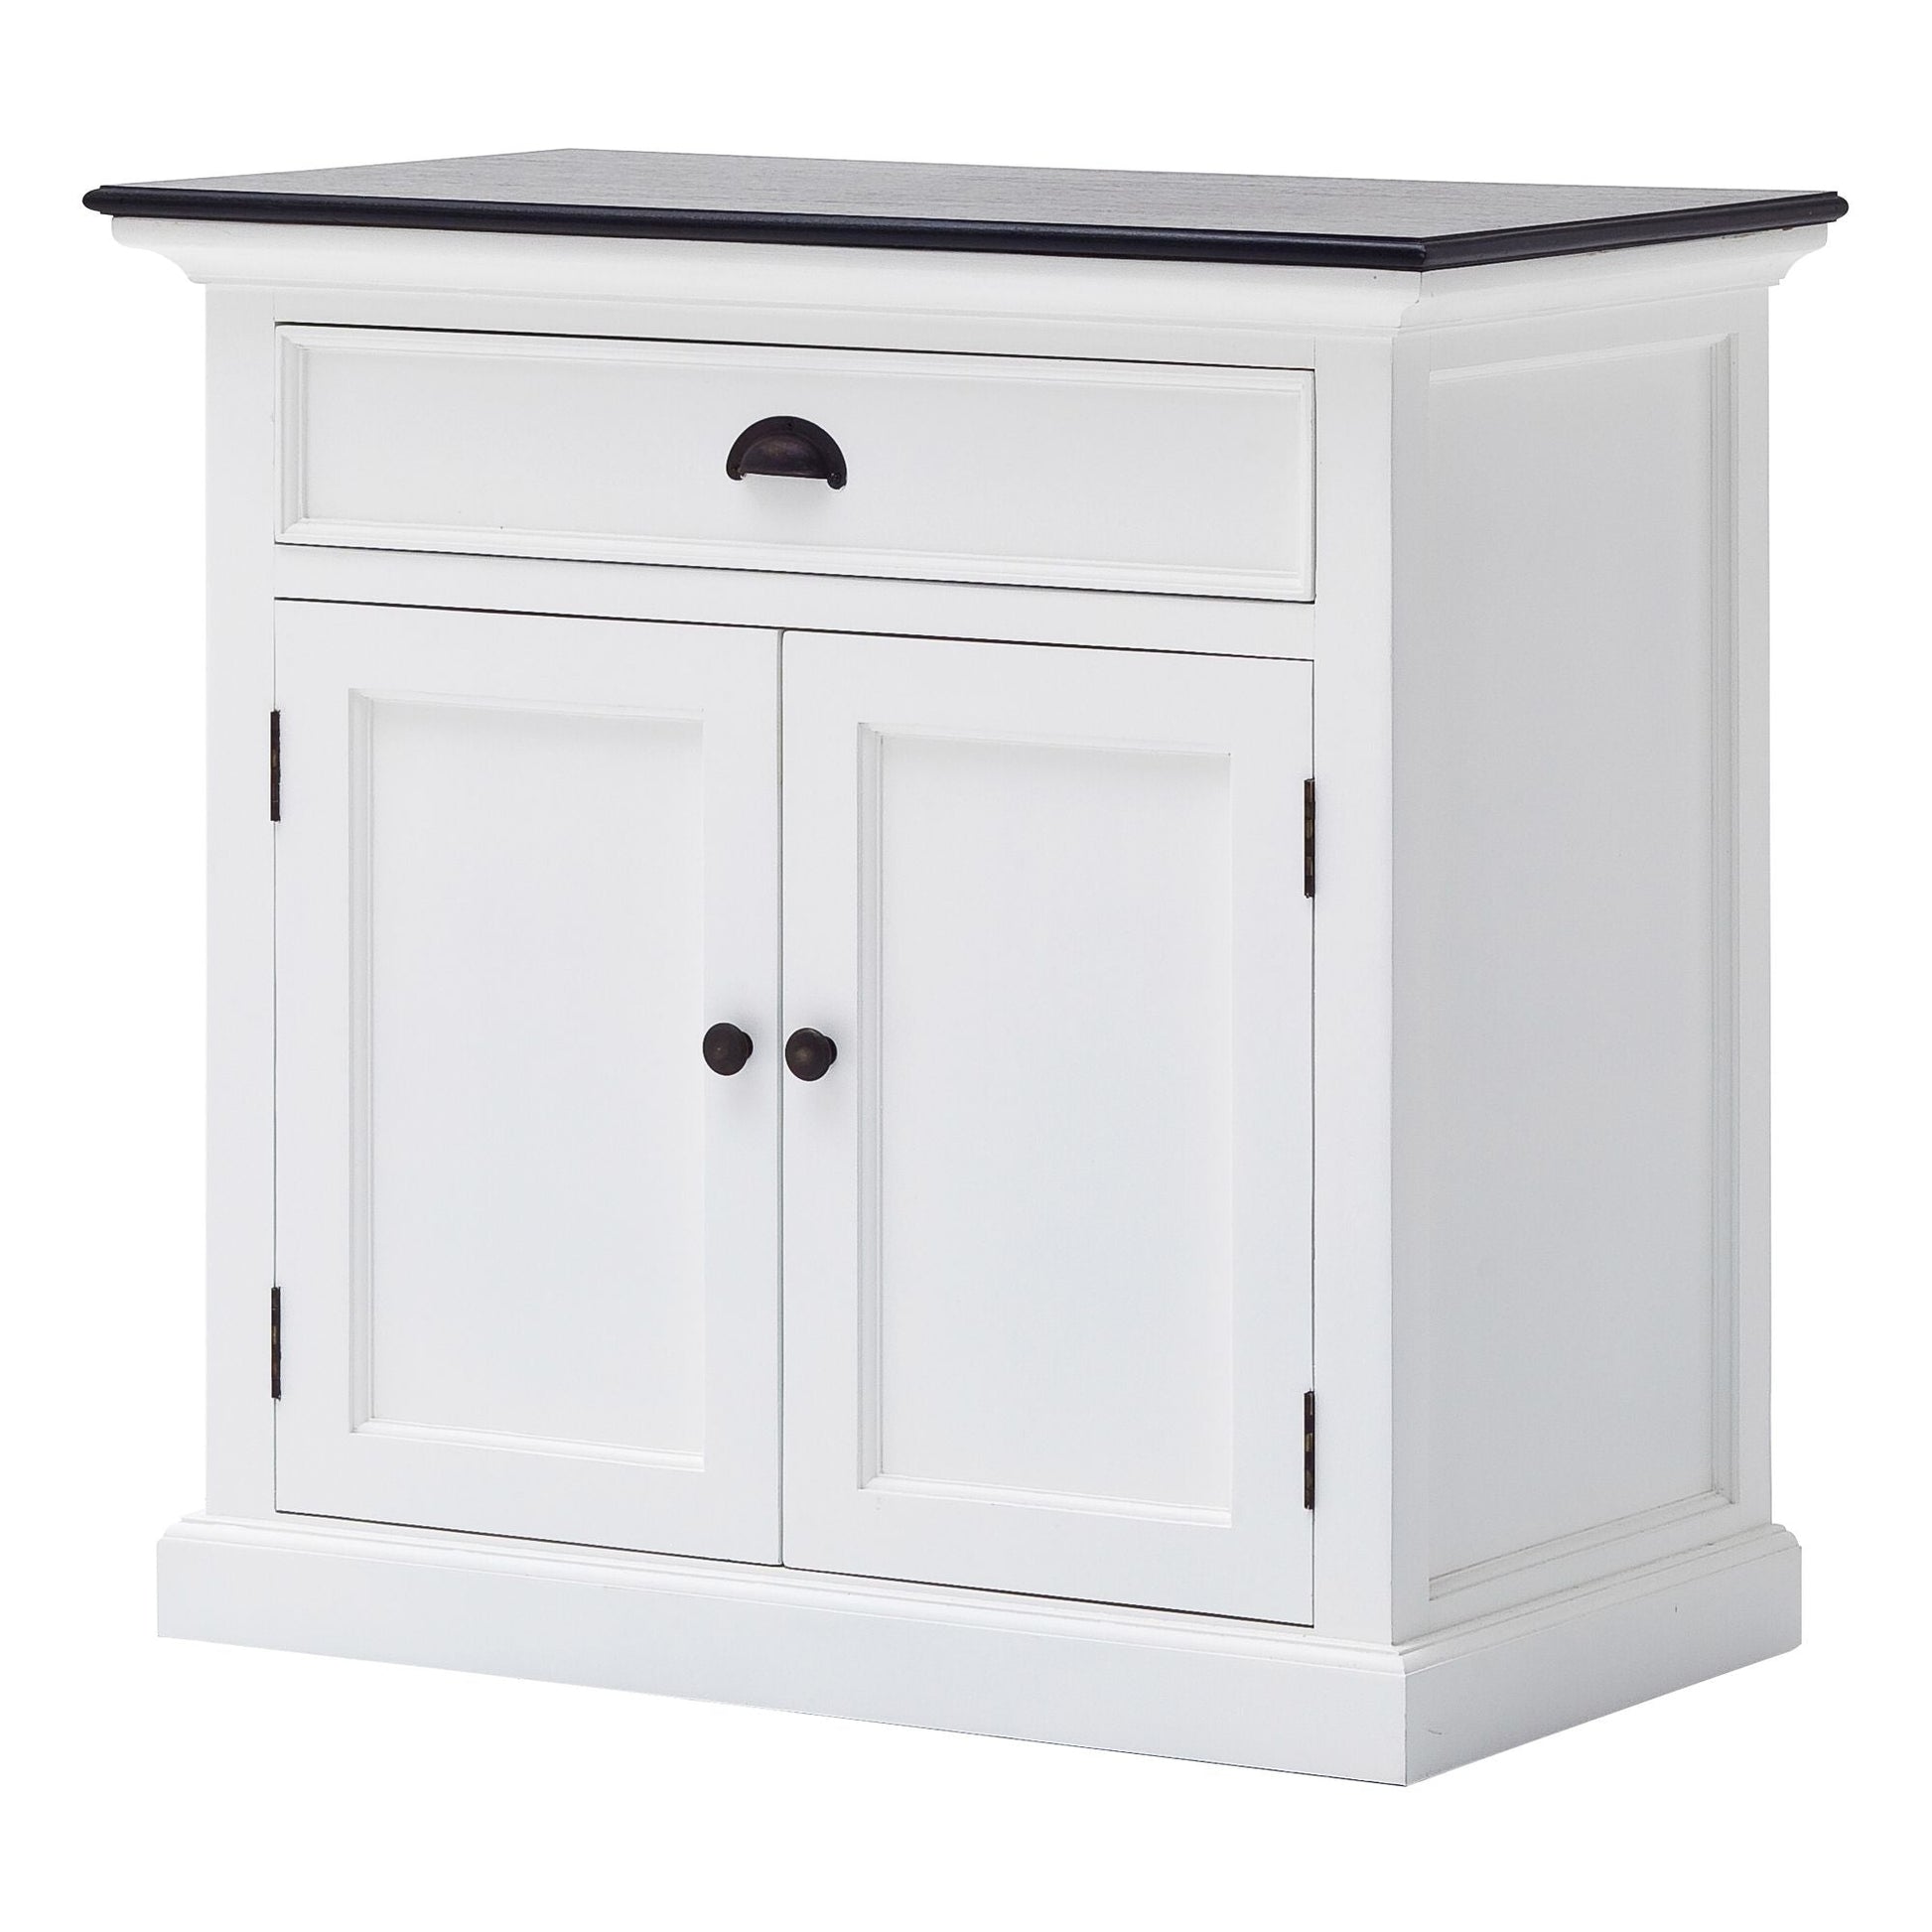 NovaSolo Halifax Contrast 35" Classic White & Black Mahogany Buffet With 2 Doors & 1 Drawer